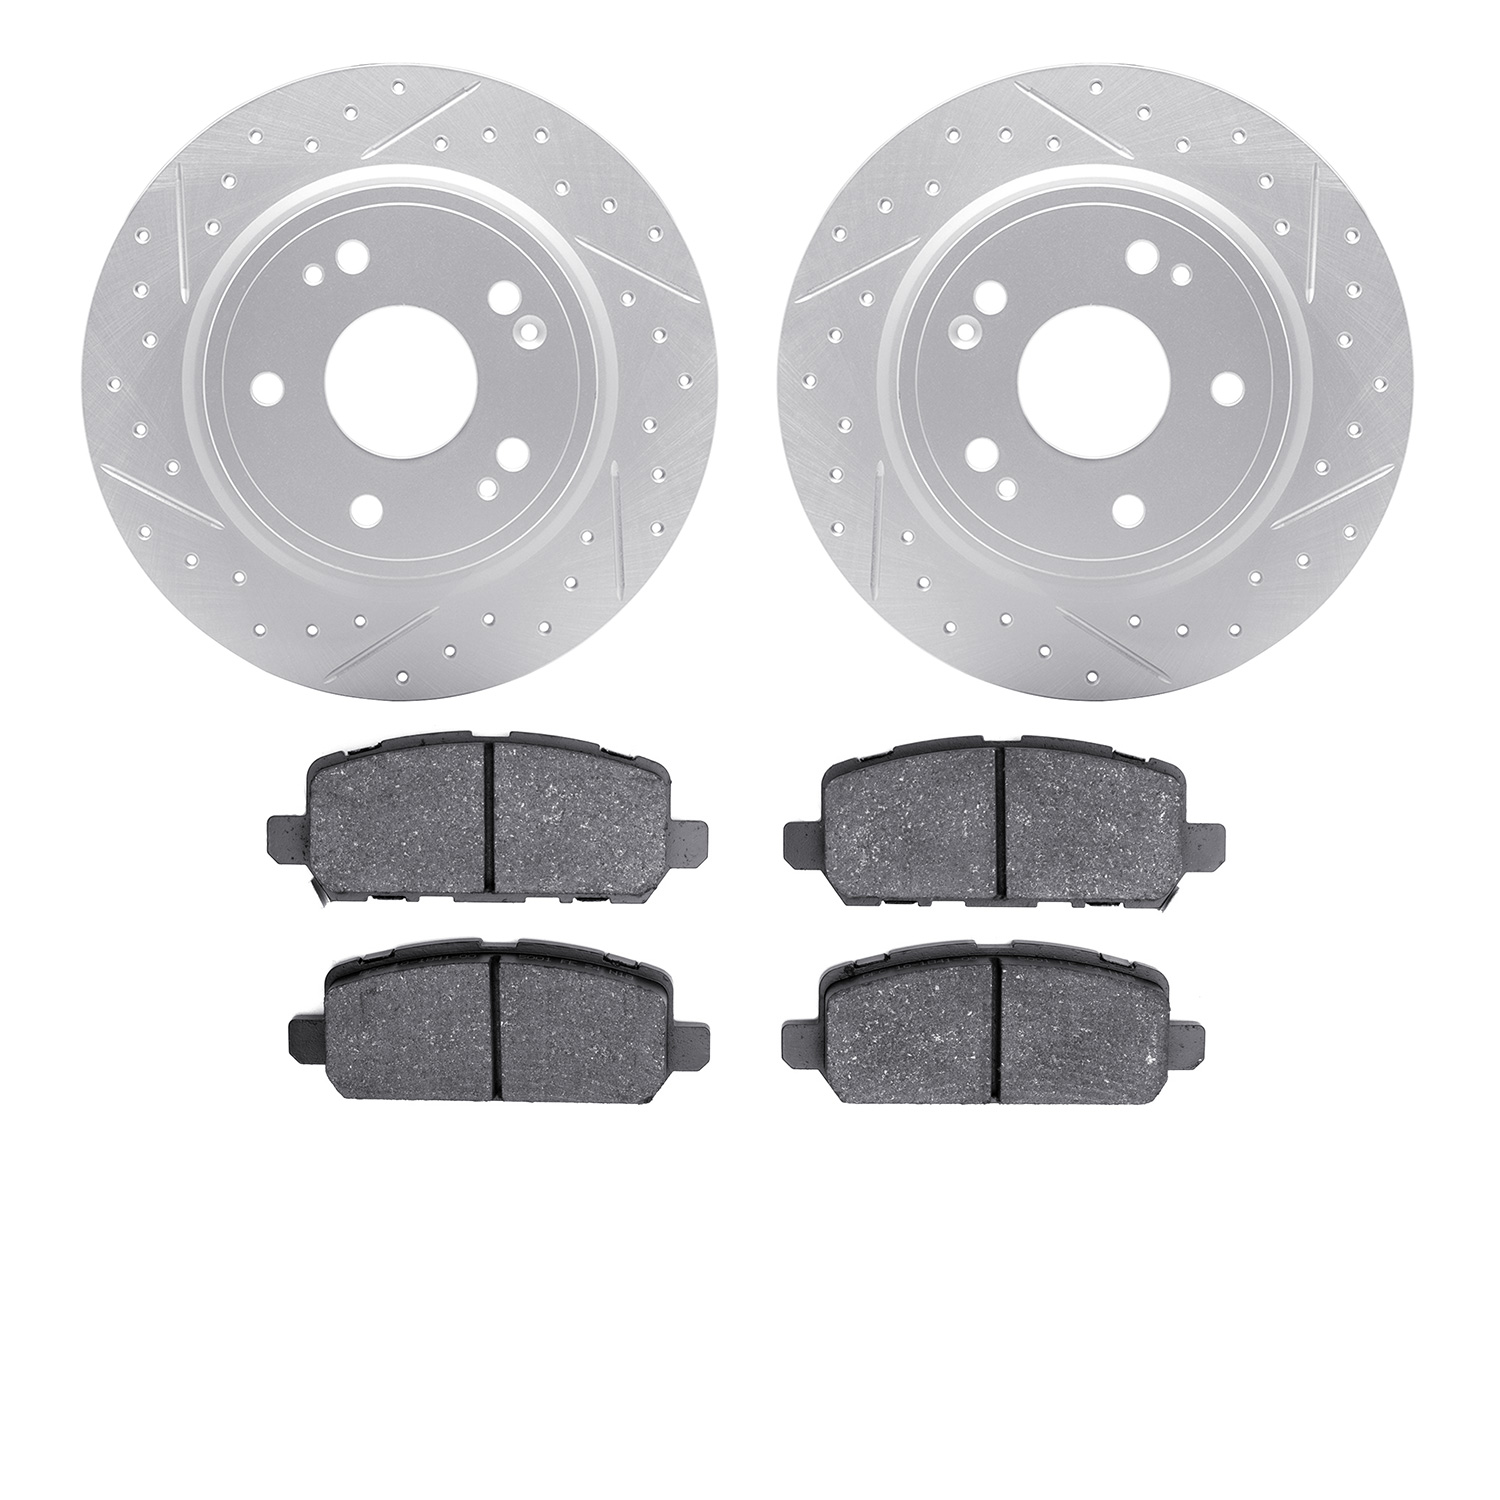 2502-59118 Geoperformance Drilled/Slotted Rotors w/5000 Advanced Brake Pads Kit, Fits Select Acura/Honda, Position: Rear